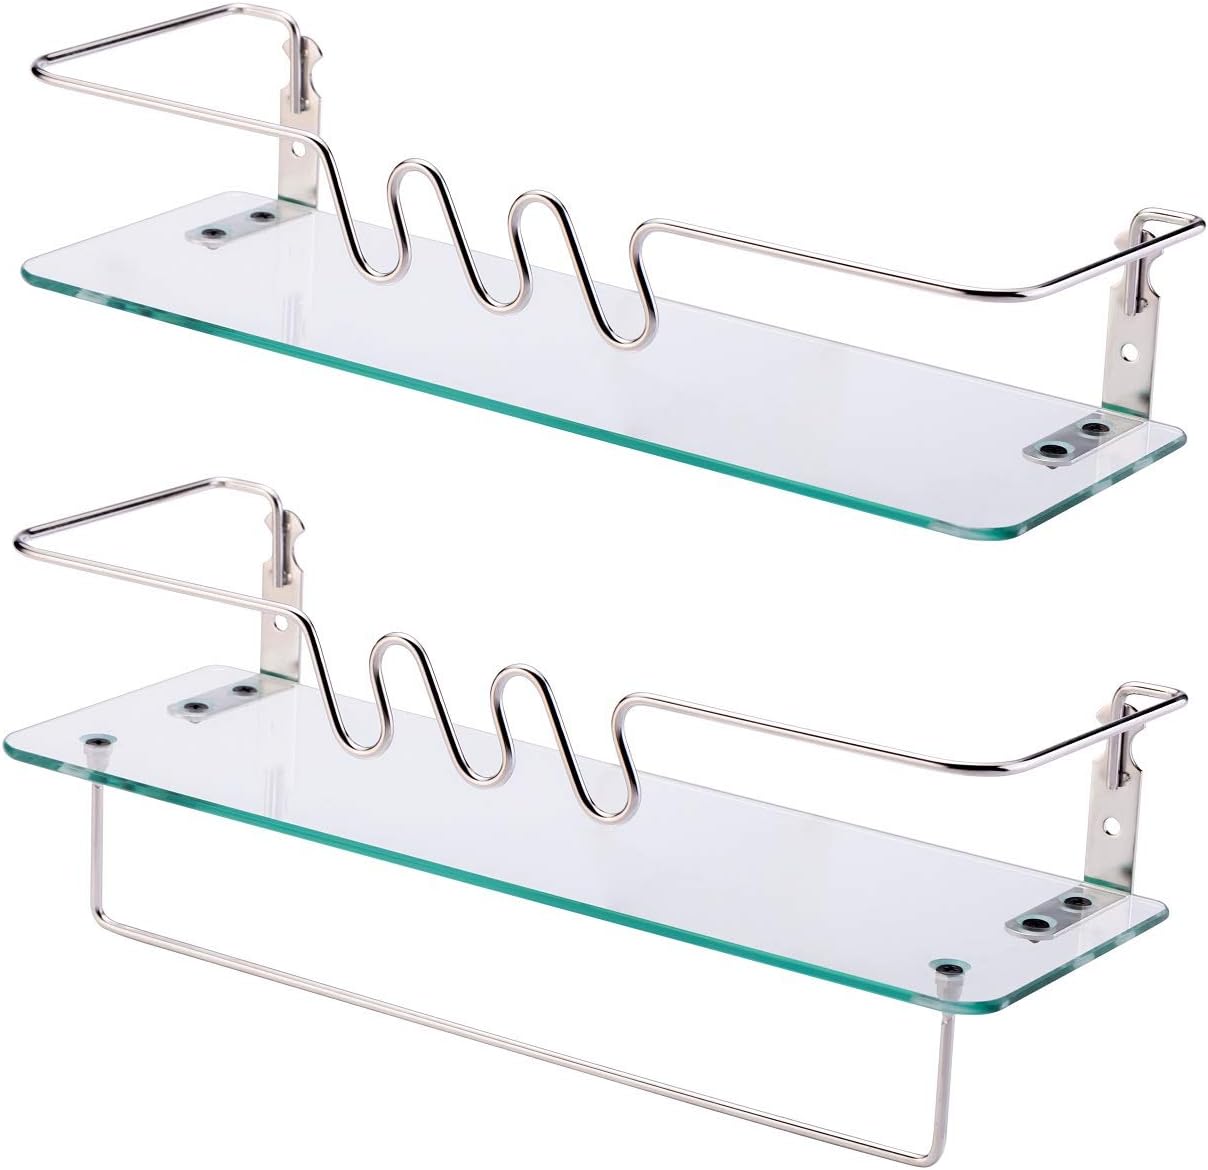  FlagShip Bathroom Shelf SUS 304 Stainless Steel Frame with Towel Bar,Floating Glass Shelf Wall Mount(2 Pack) 